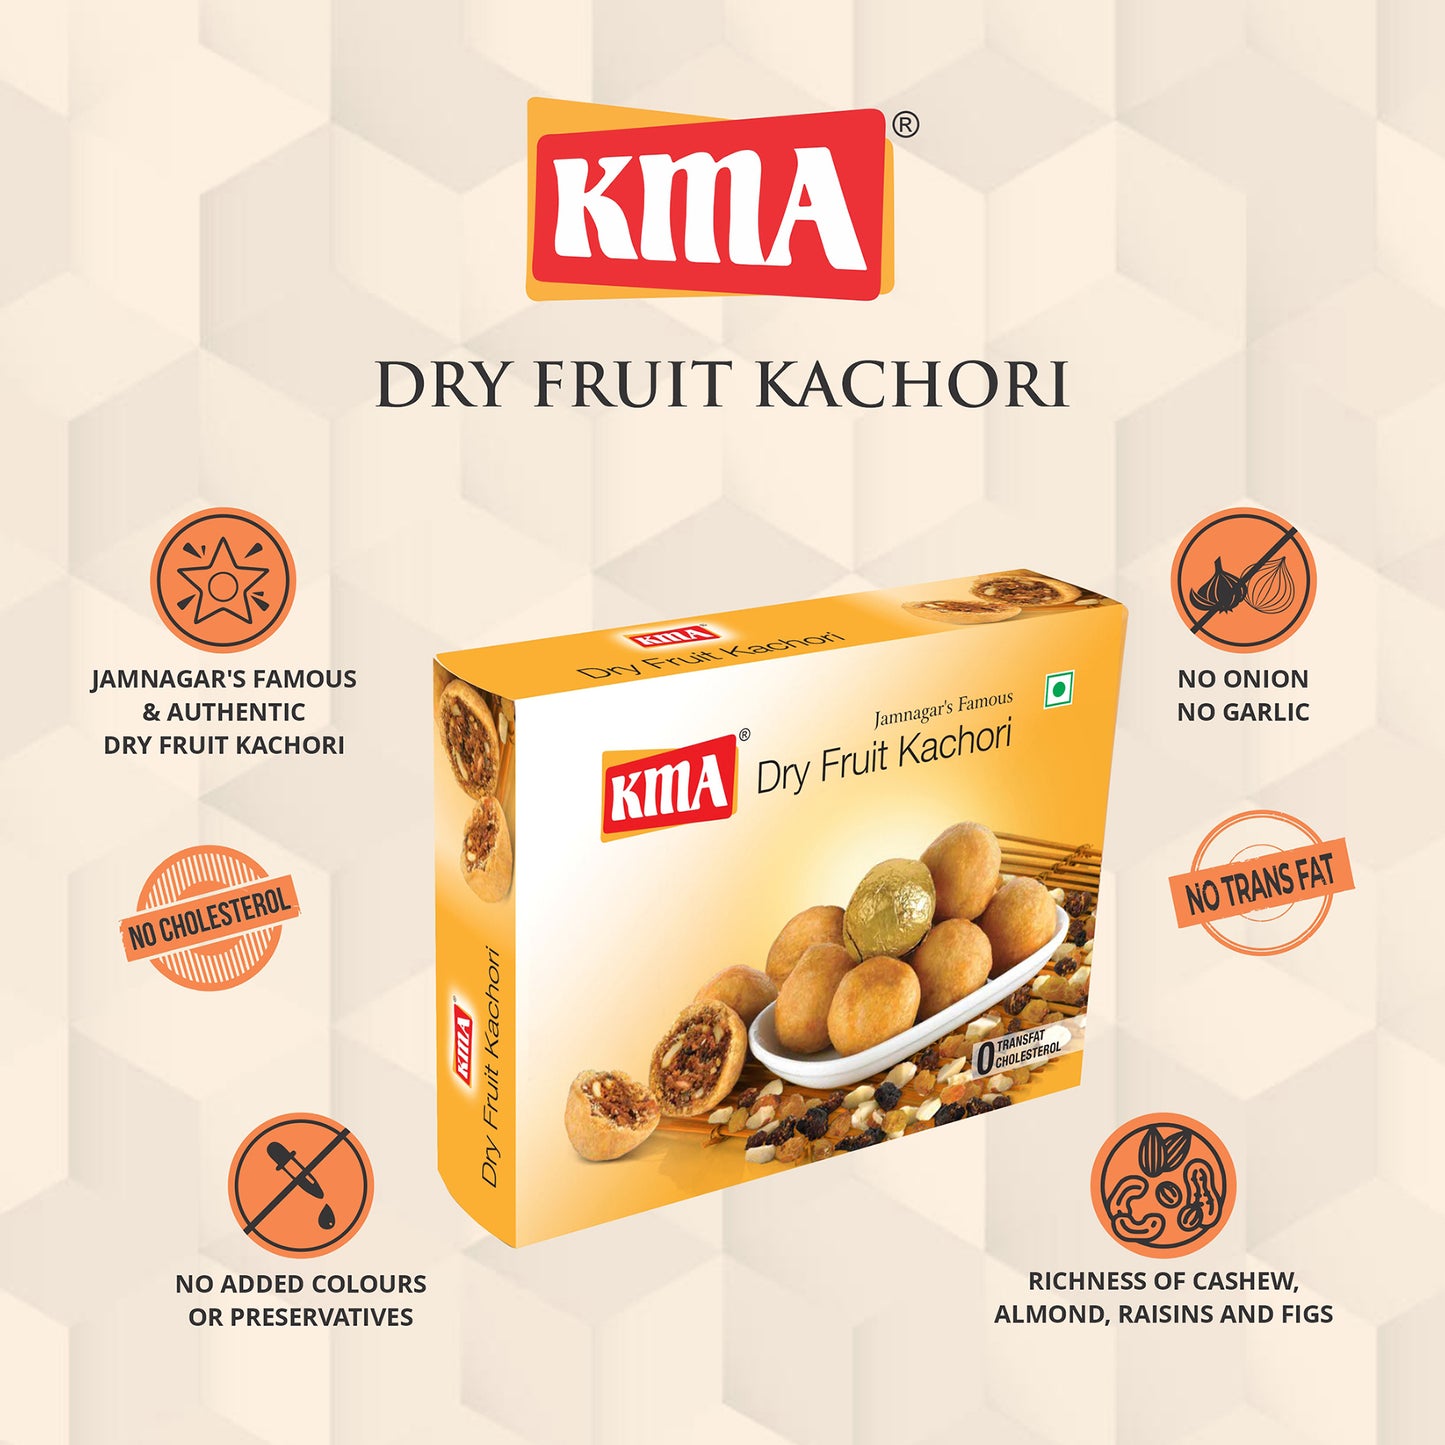 With a shelf life of 4 months, you can be assured of receiving a fresh product manufactured in the same month. KMA Dry Fruit Kachori is a ready-to-eat snack that can be enjoyed anytime. It pairs perfectly with tea, coffee, or can be savored on its own. Whether it's for morning or evening breakfast, a picnic, or while traveling, this snack is versatile and convenient.